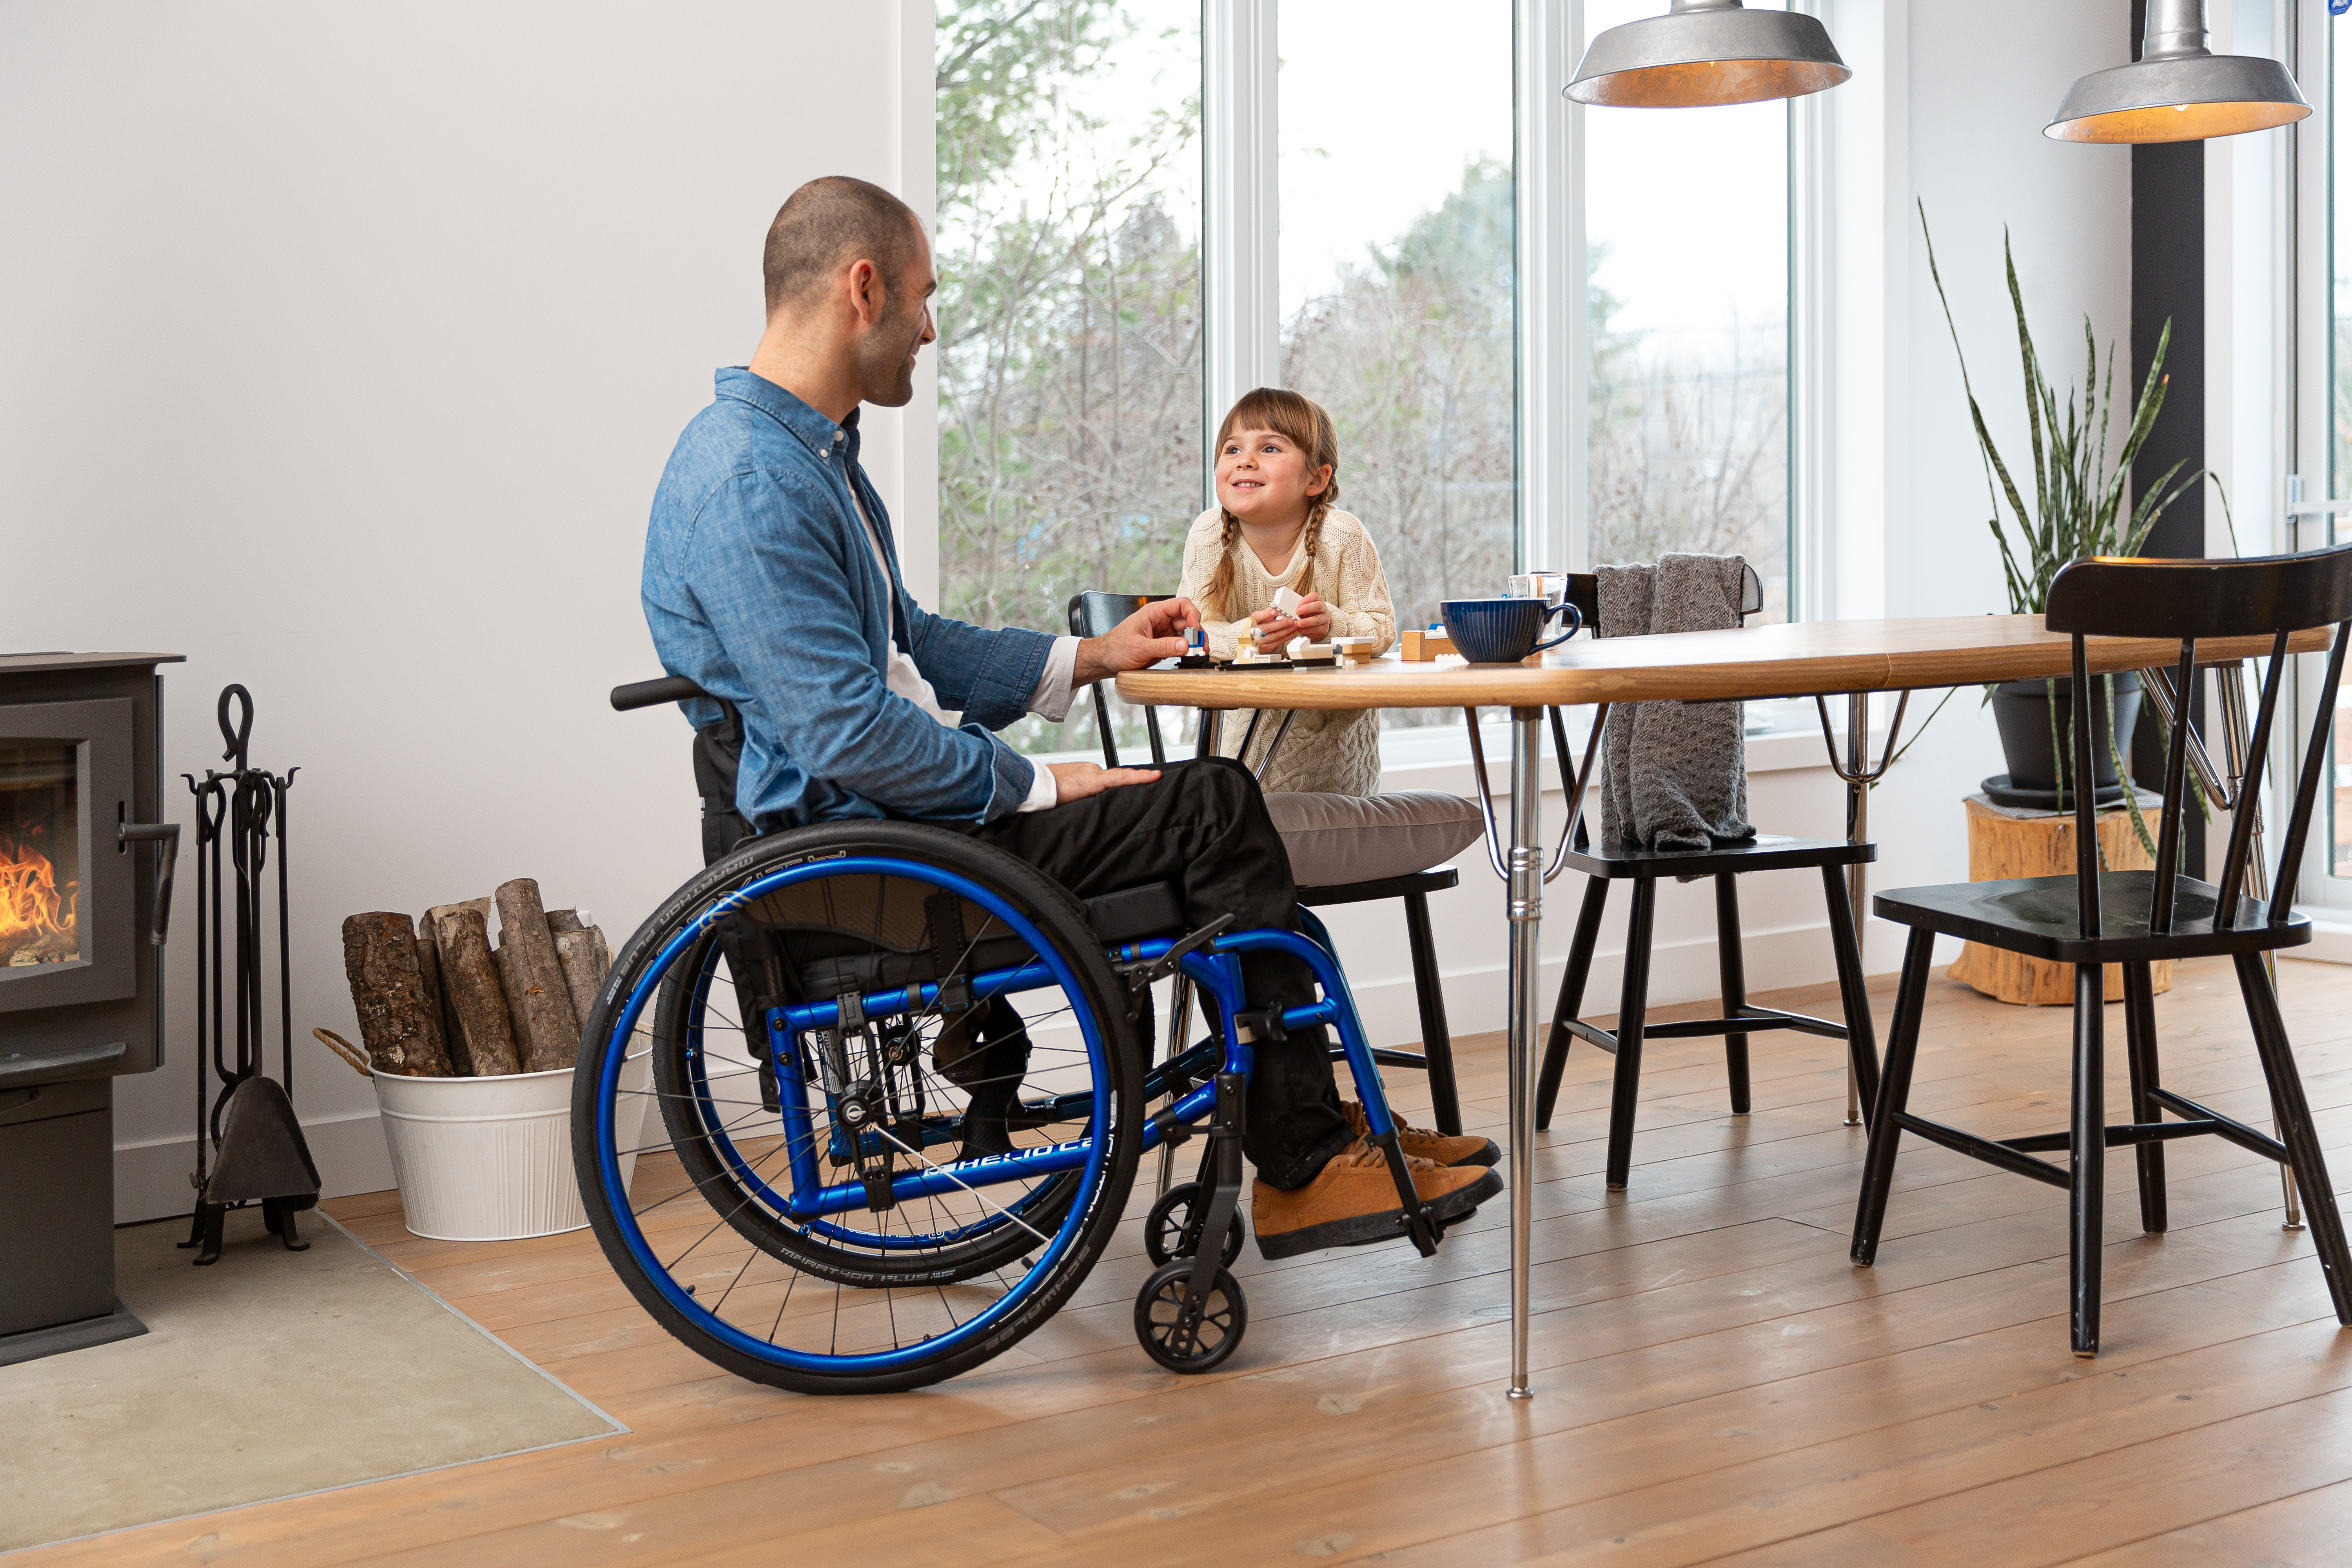 A man using a blue Helio C2 lightweight wheelchair sits at a kitchen table, smiling at his daughter. She smiles back while kneeling on a kitchen chair. There is a fireplace in the corner with a warm fire burning, and a window to the trees behind her.